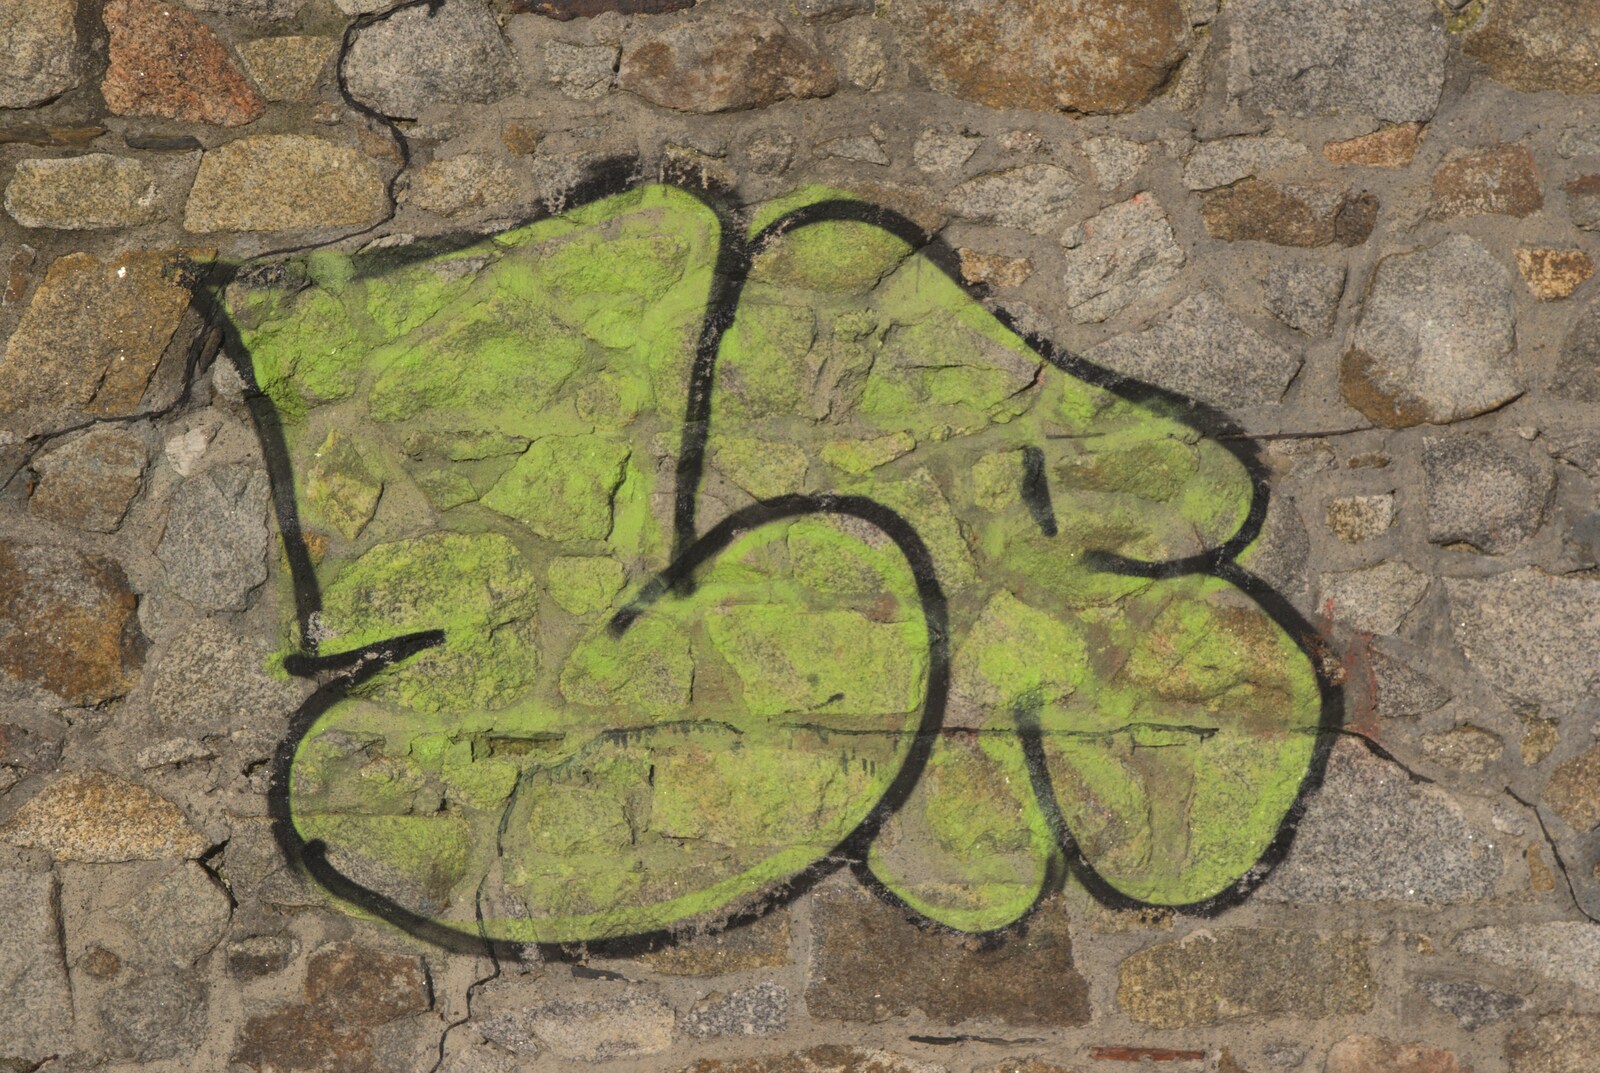 Green graffiti on a castle wall from Monkstown Graffiti and Dereliction, County Dublin, Ireland - 26th December 2009